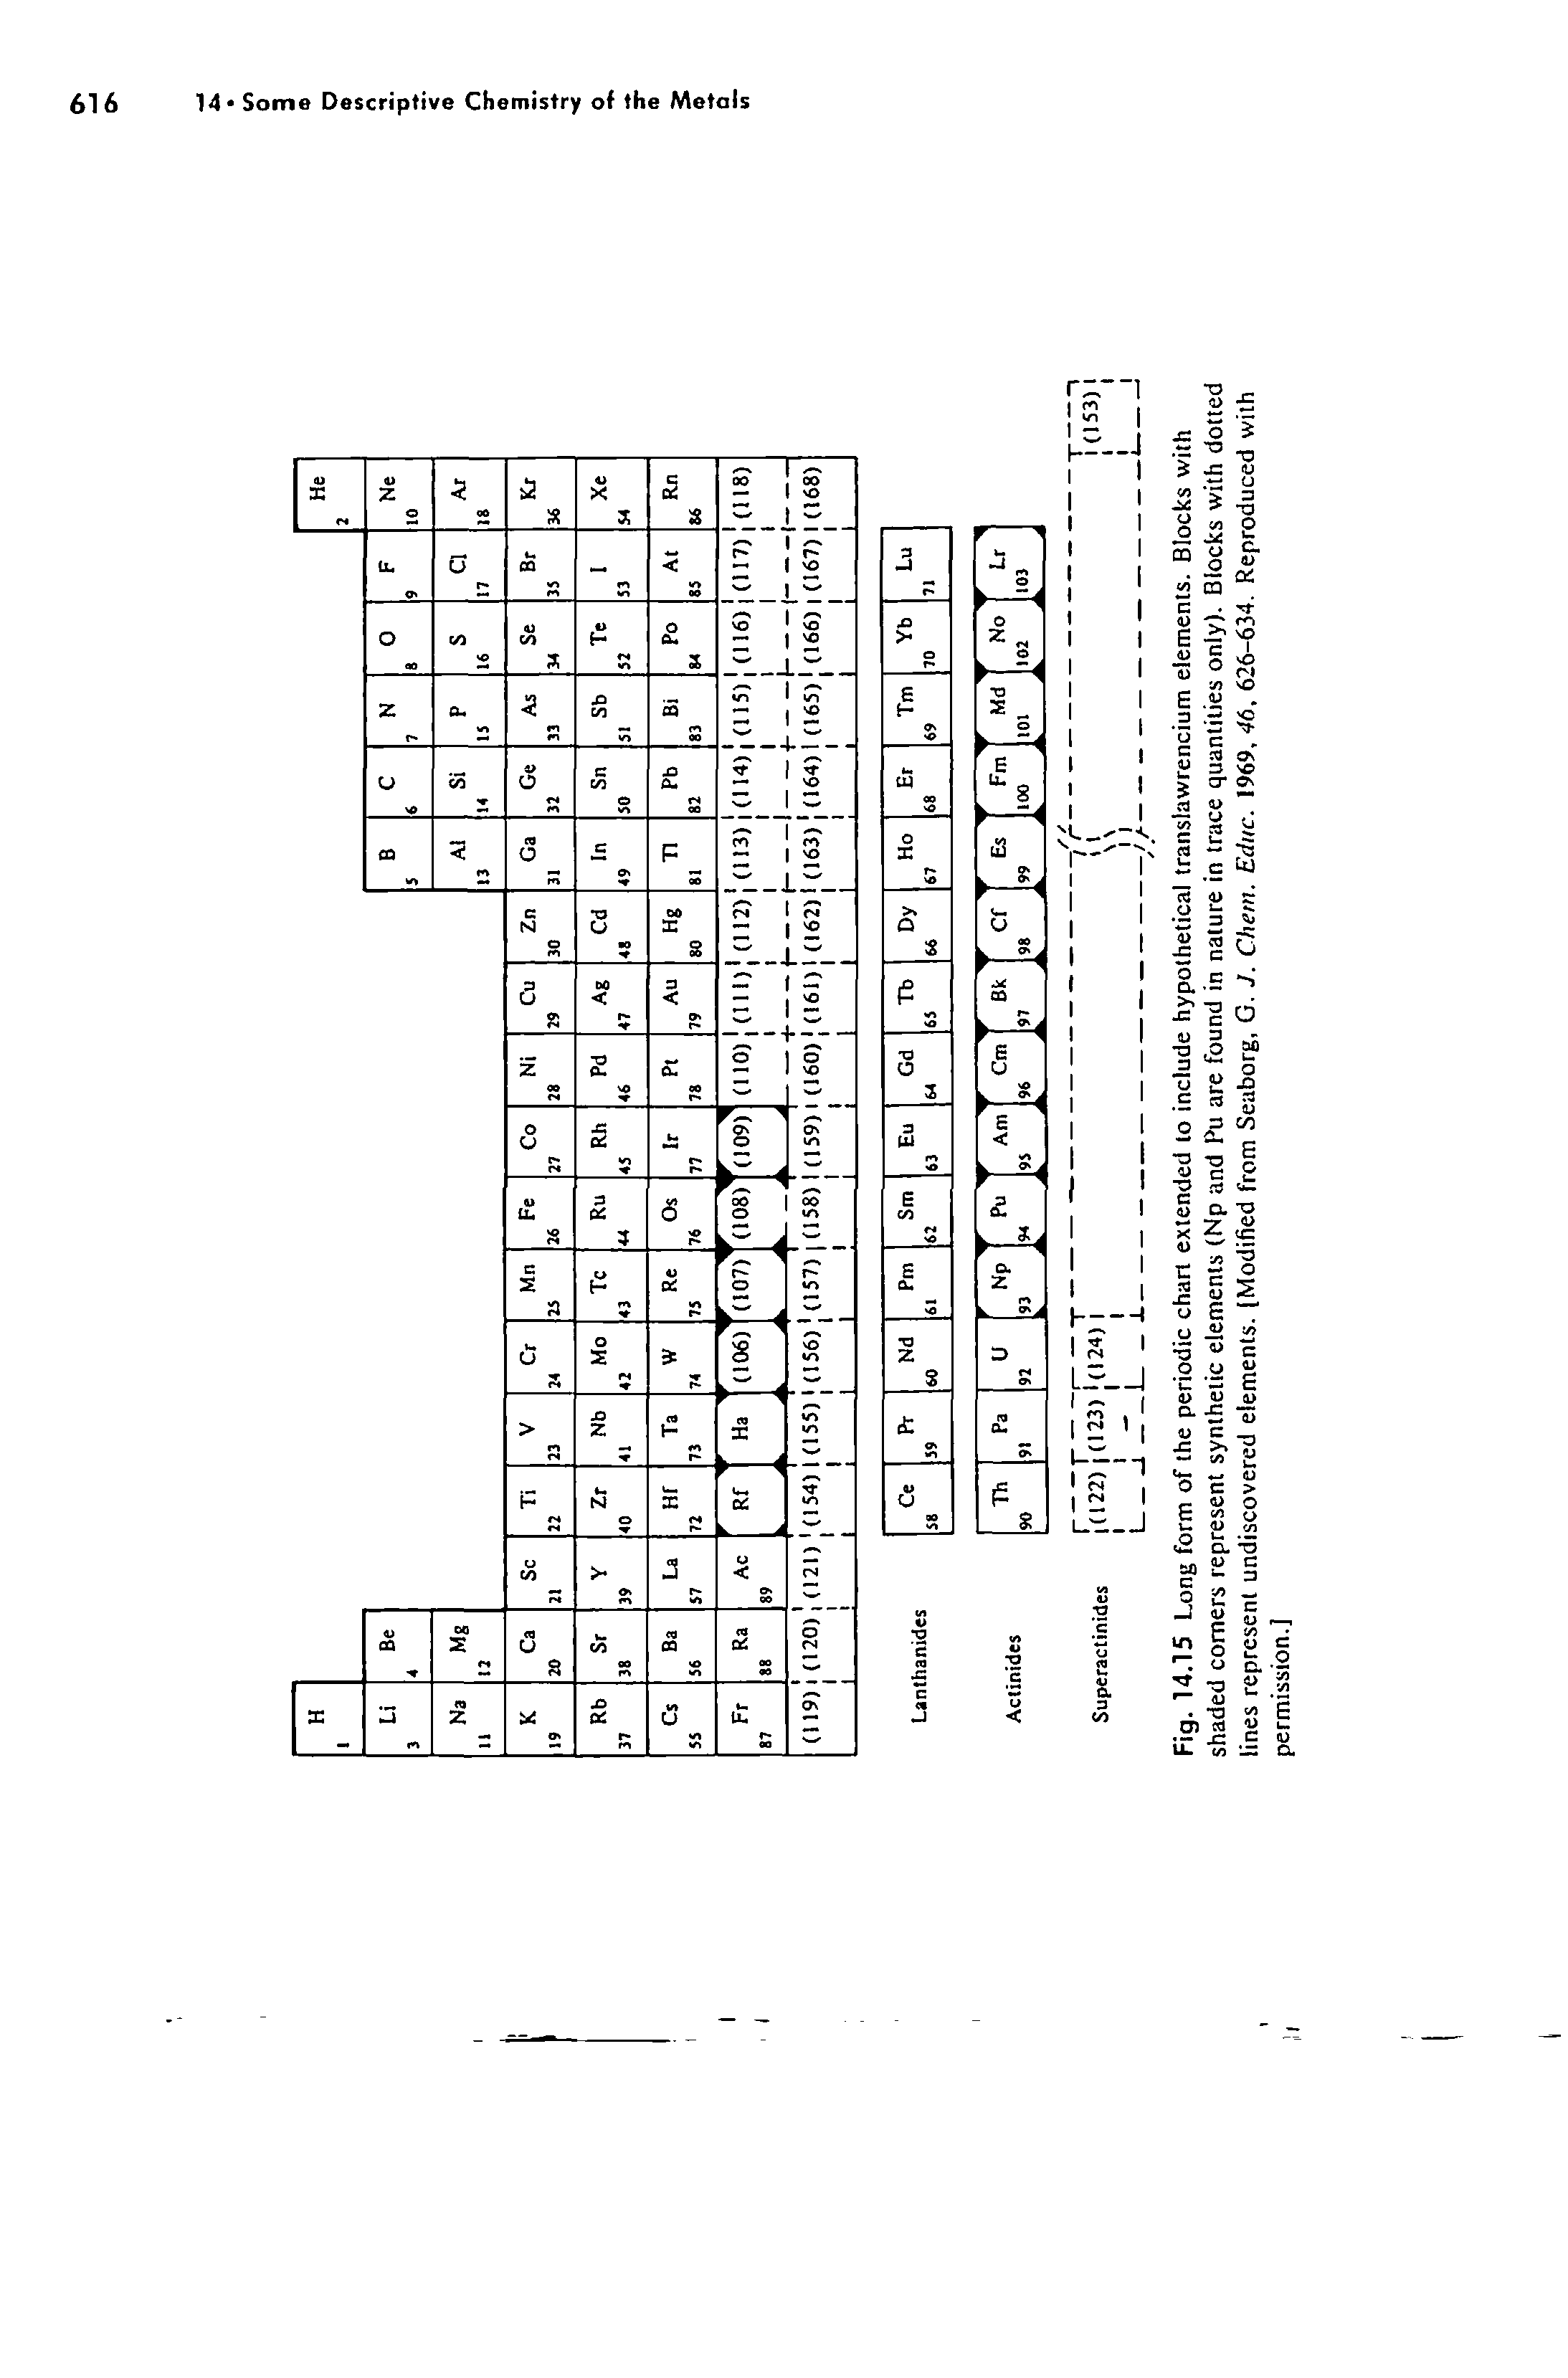 Fig. 14.15 Long form of the periodic chart extended to include hypothetical translawrencium elements. Blocks with shaded comers represent synthetic elements (Np and Pu are found in nature in trace quantities only). Blocks with dotted lines represent undiscovered elements. (Modified from Seaborg, G. J. Client. Educ. 1969, 46, 626-634. Reproduced with permission.]...